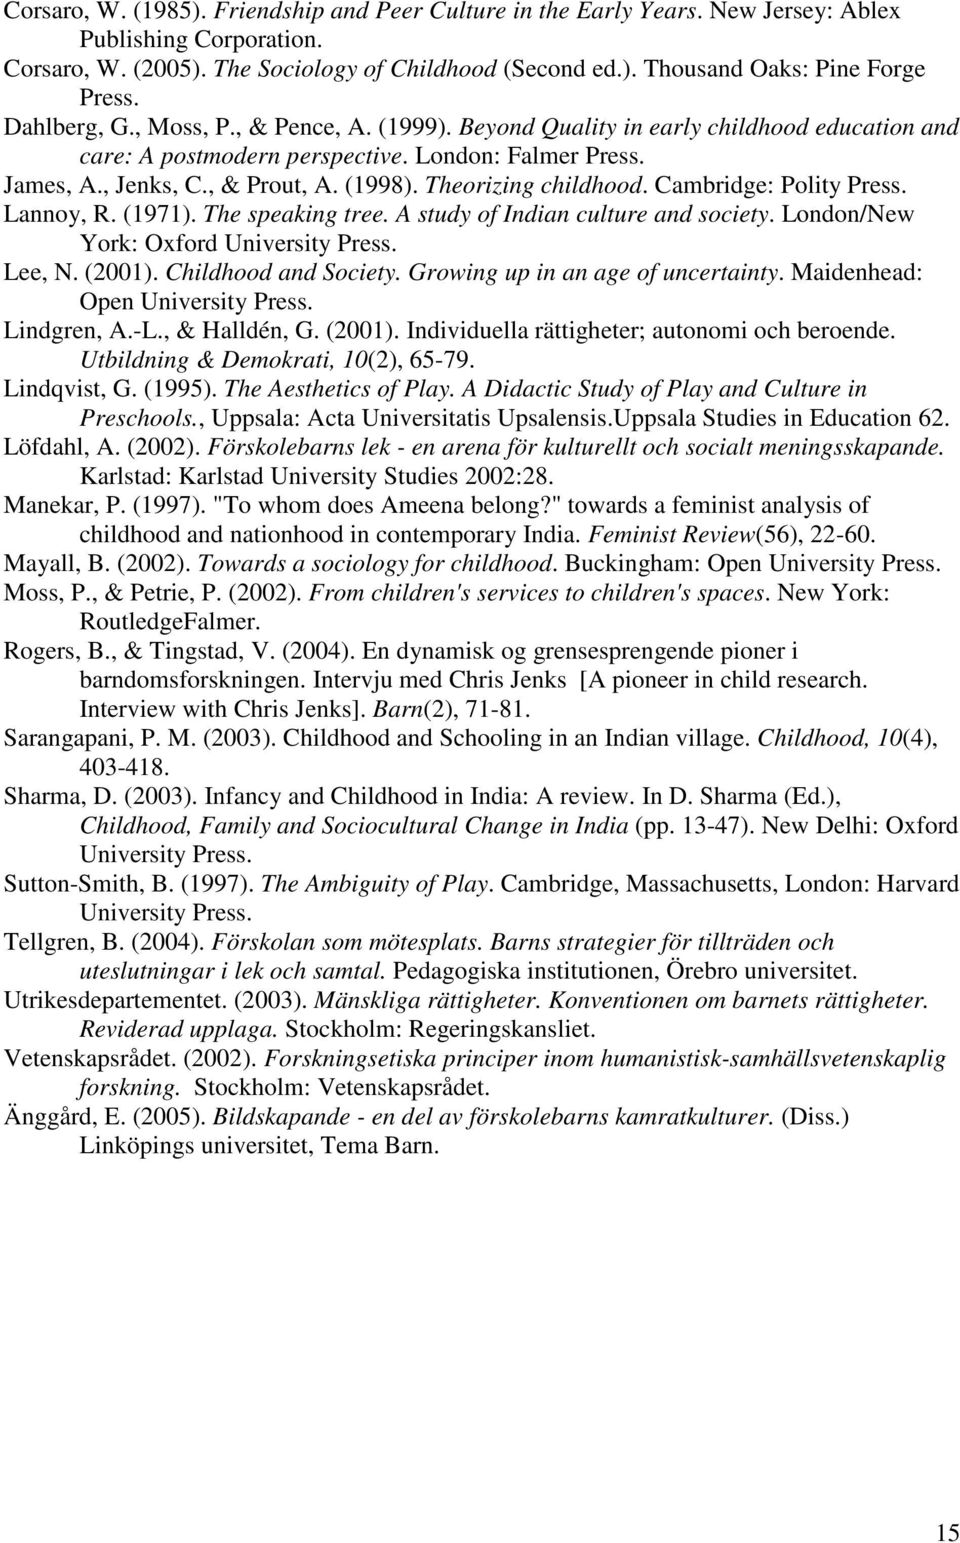 Theorizing childhood. Cambridge: Polity Press. Lannoy, R. (1971). The speaking tree. A study of Indian culture and society. London/New York: Oxford University Press. Lee, N. (2001).